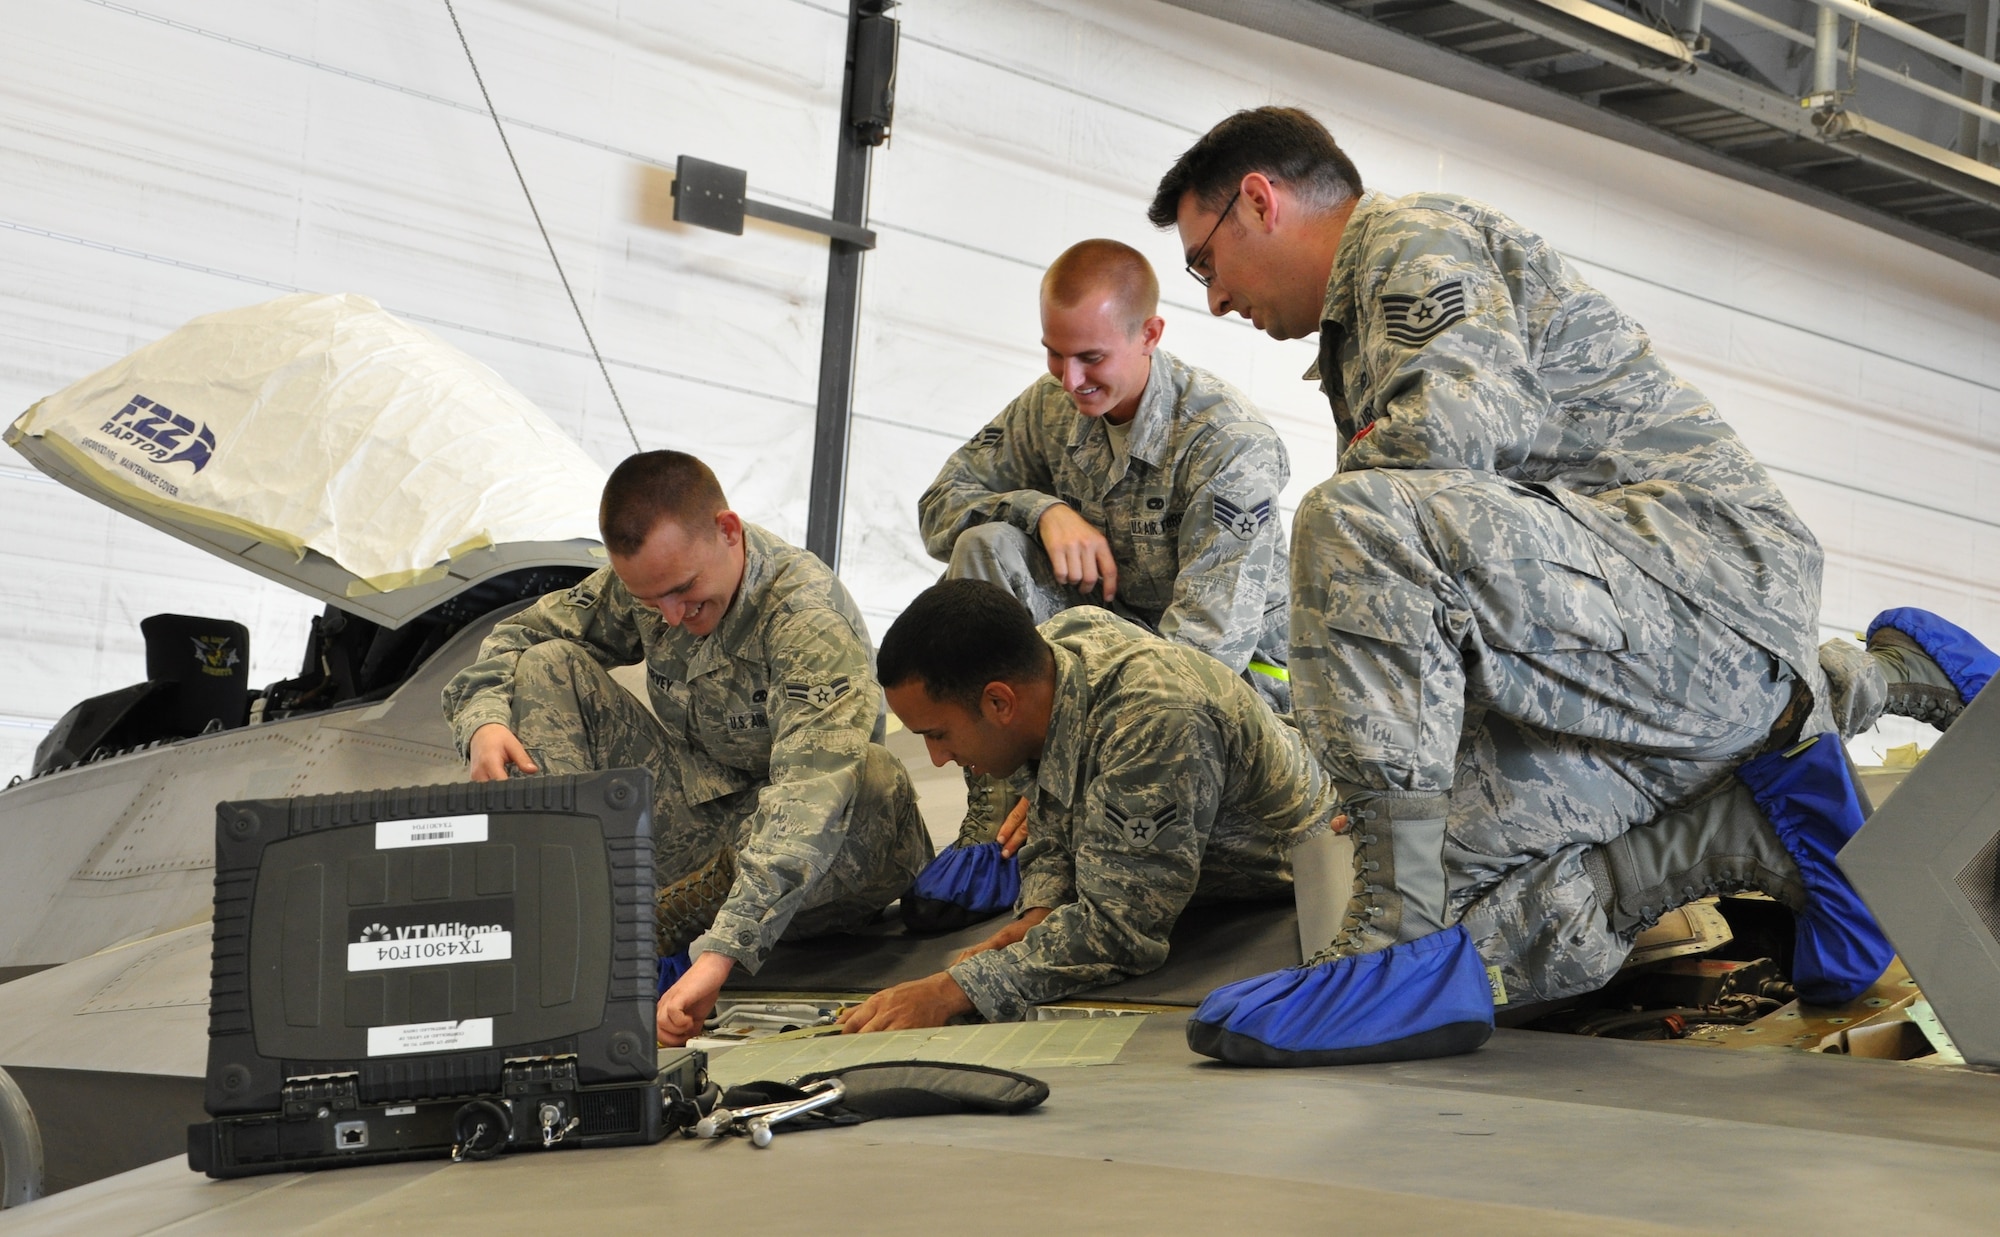 Tech. Sgt. Kraig Callais, 43rd Aircraft Maintenance Unit avionics fleet health manager, Senior Airman Christopher Dunn, 43rd AMU F-22 specialist, Airman 1st Class Kenan Harvey, 43rd AMU F-22 specialist and Airman 1st Class Daniel Ramize, 43rd AMU F-22 specialist, address an issue on top of an F-22 Raptor as part of the Avionics Health of the Fleet inside the hangar of the 43rd AMU at Tyndall Air Force Base, Fla. AVHOF is a program implemented to increase the number of fully mission capable F-22s on Tyndall’s flight line. (U.S. Air Force photo by Airman 1st Class Alex Echols)